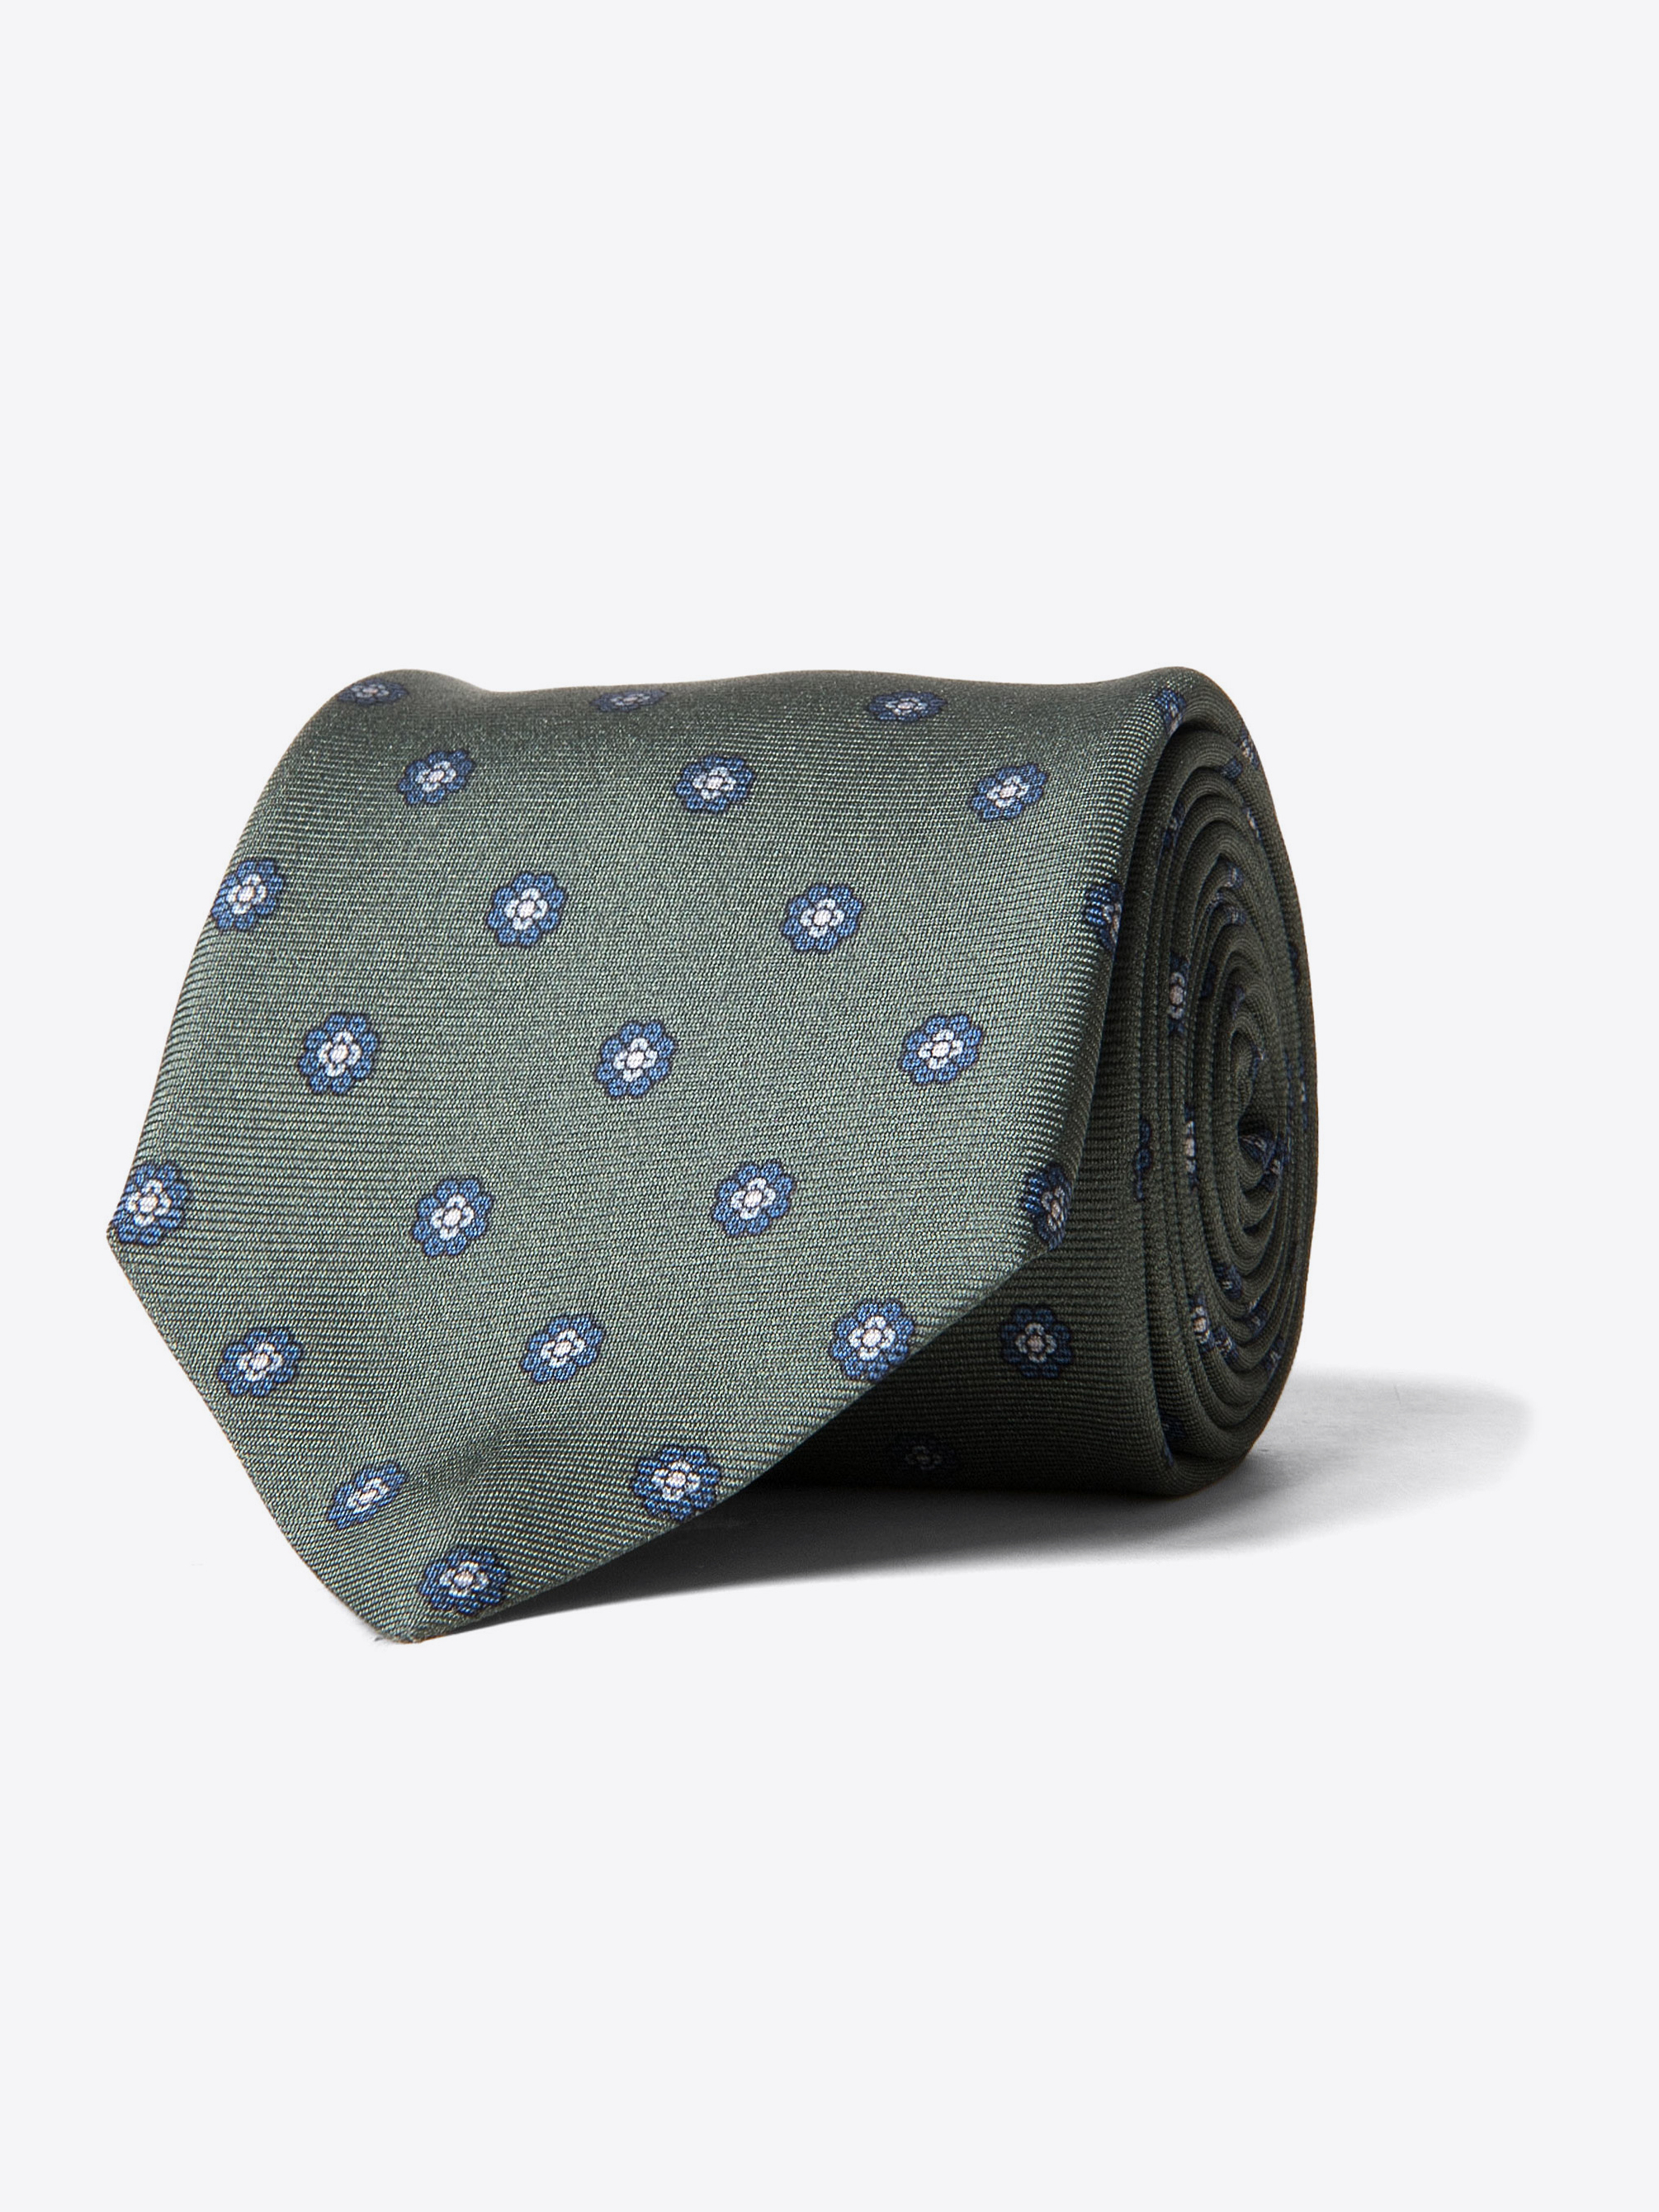 Zoom Image of Fatigue Blue and Grey Silk Foulard Tie